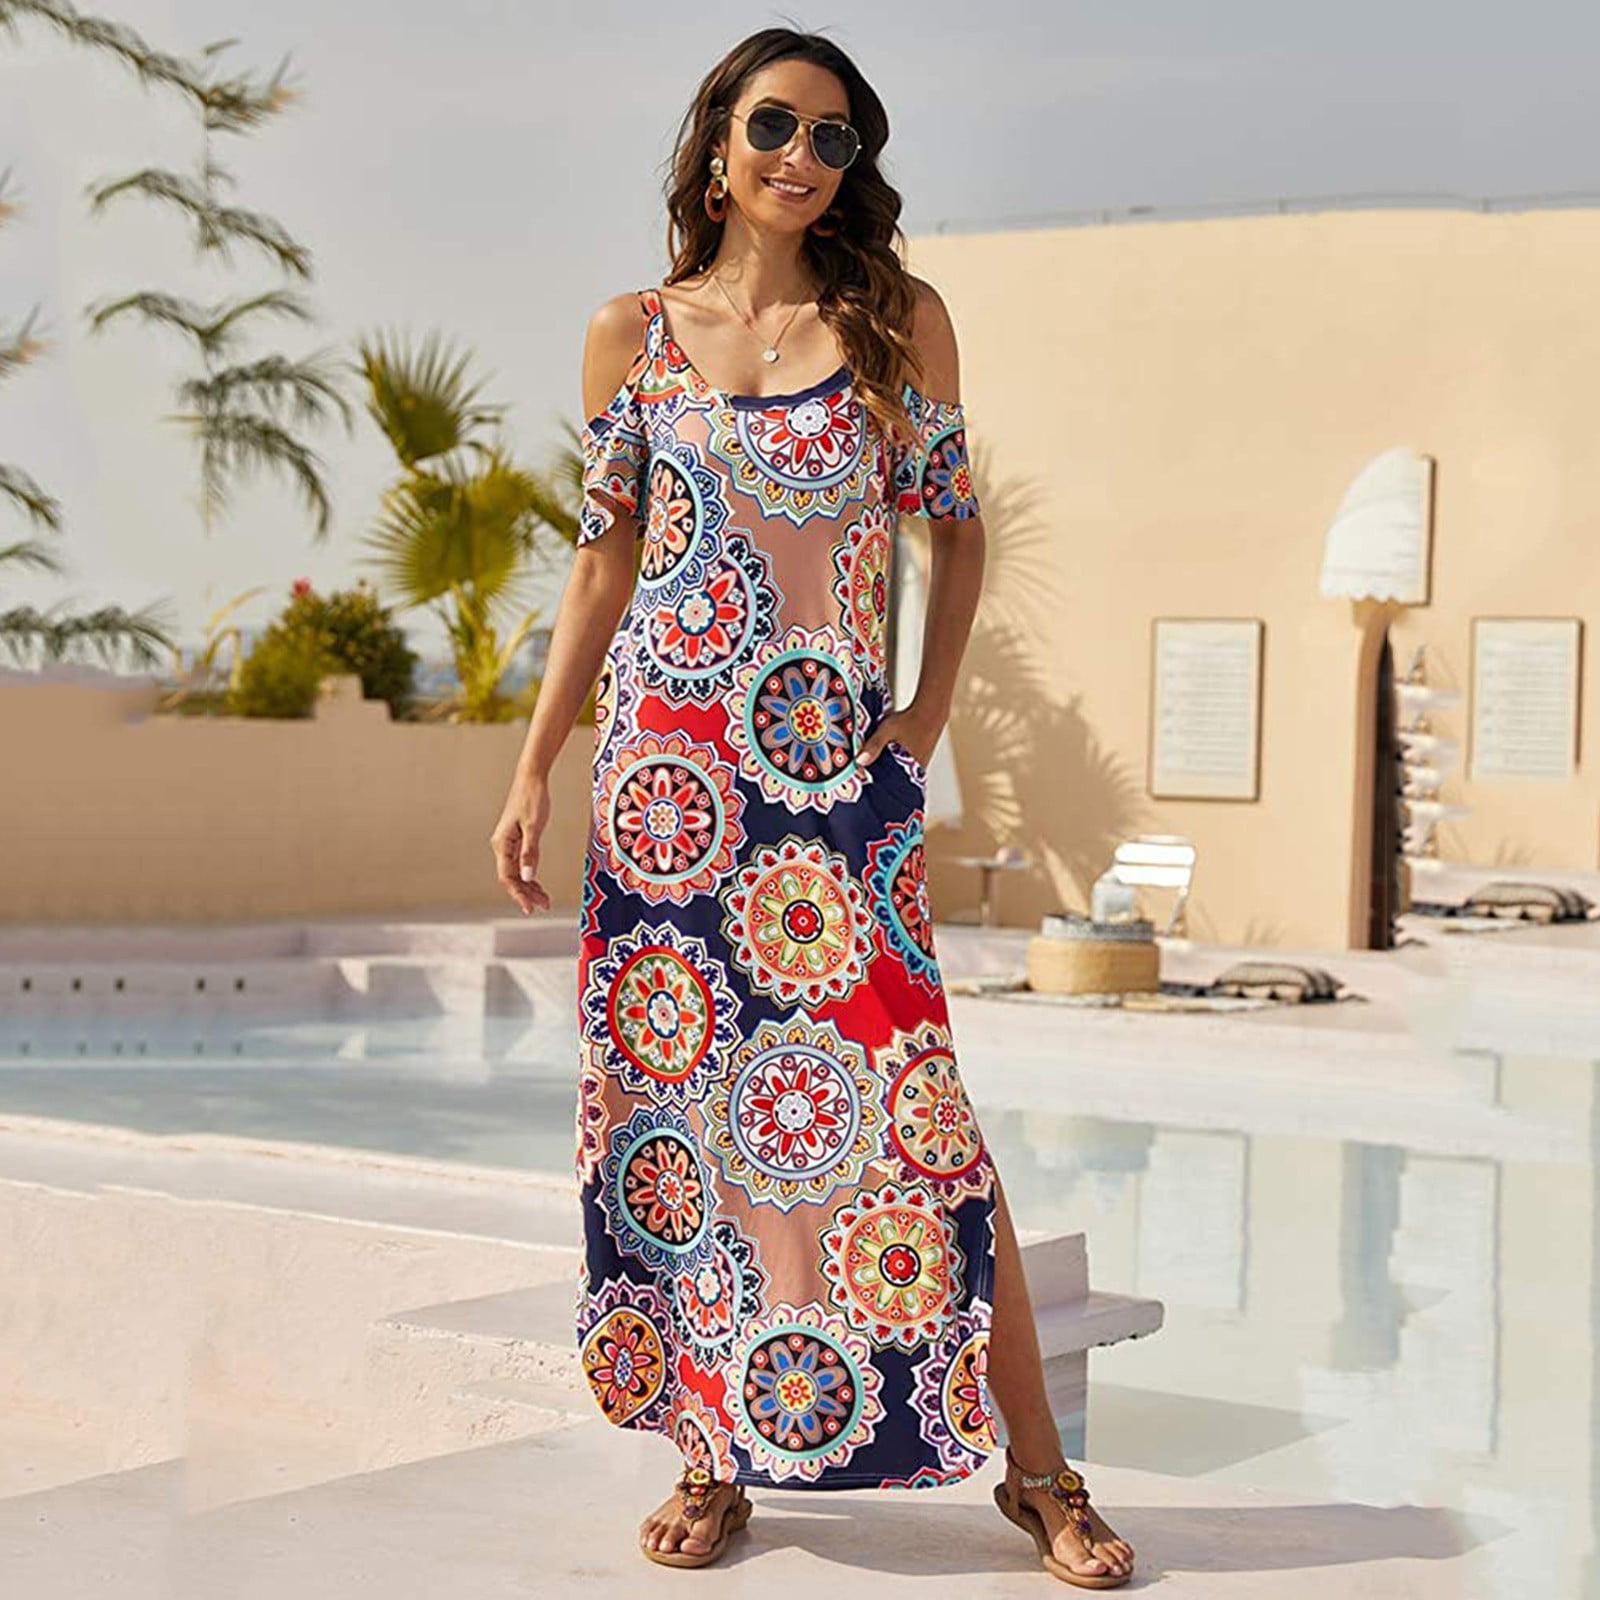 2023 Summer Womens Casual Blue Maxi Dress With Fashionable Strap Map Print,  Digital Printing, And Street Style Long Vestidos For A Chic Look From  Maoxuewang, $18.72 | DHgate.Com